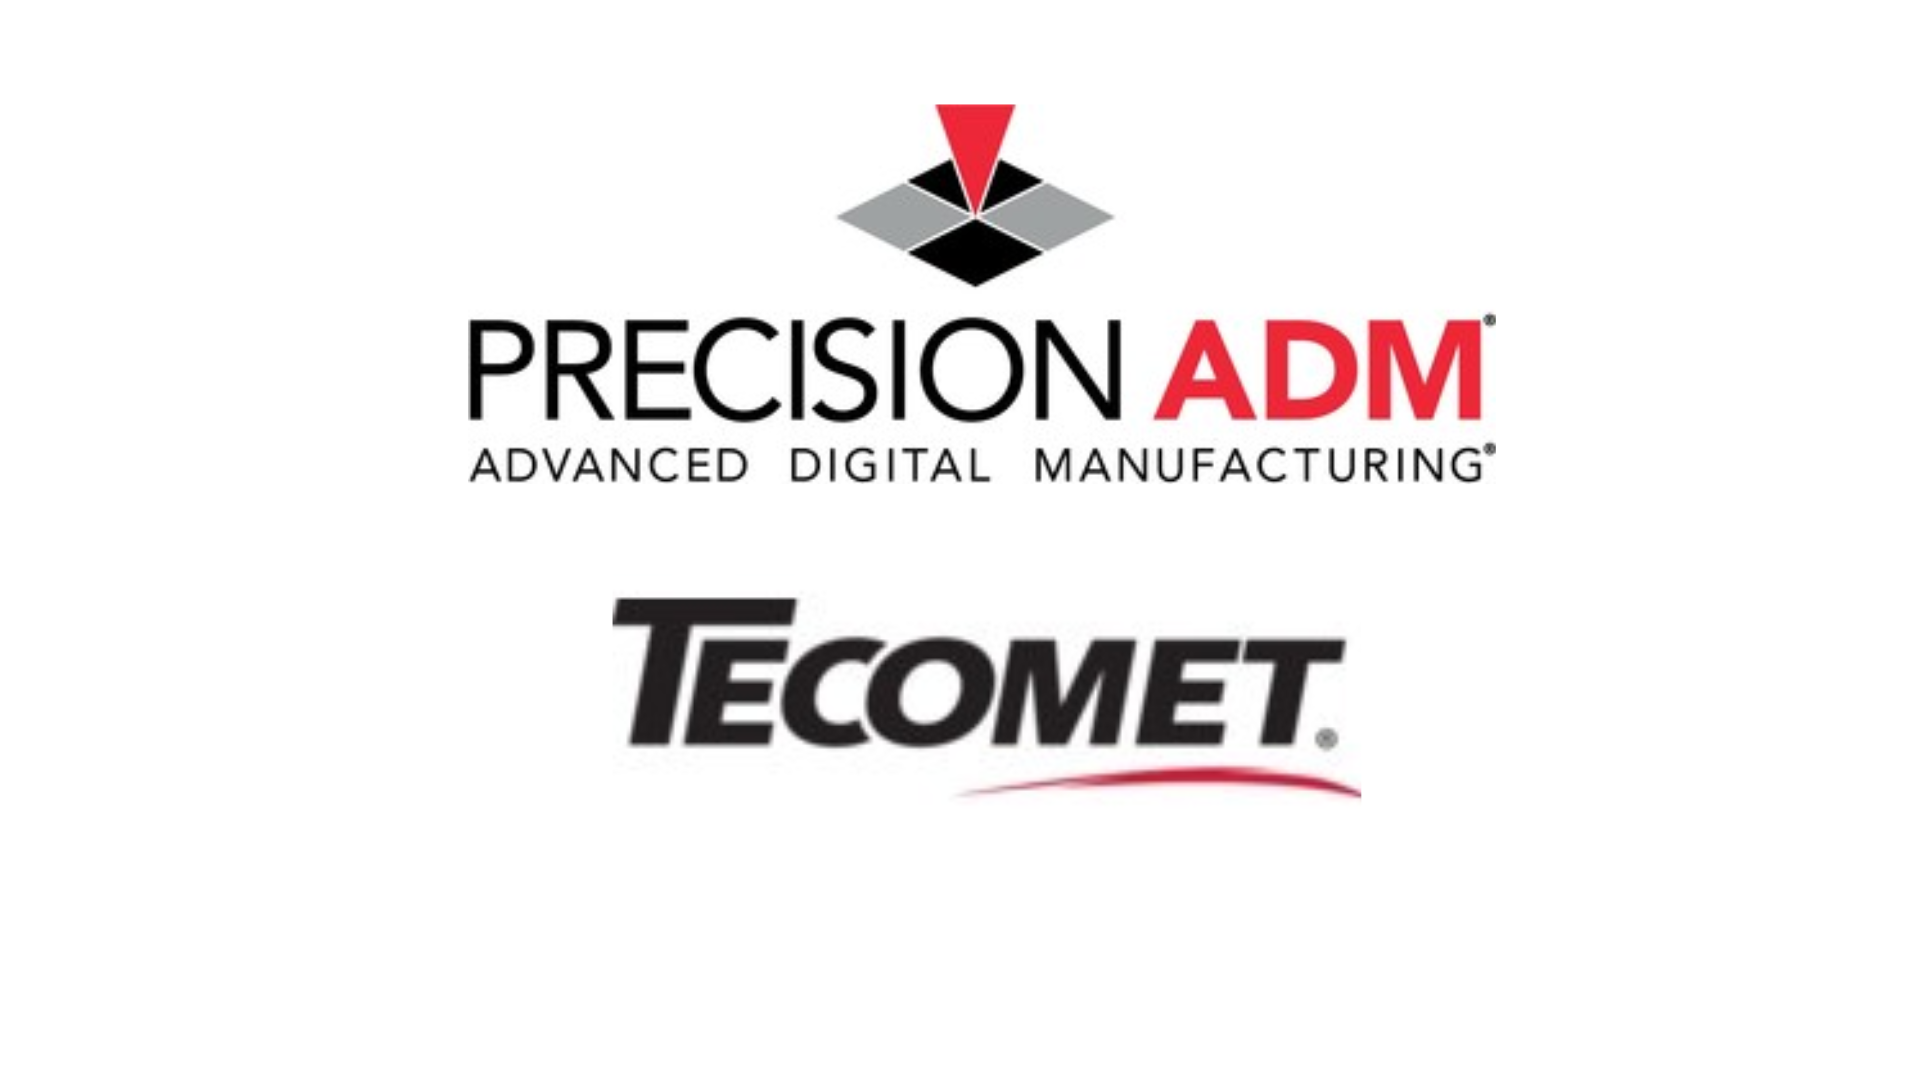 Precision ADM announced a strategic partnership with Tecomet, to expand development and production opportunities in additive manufacturing.